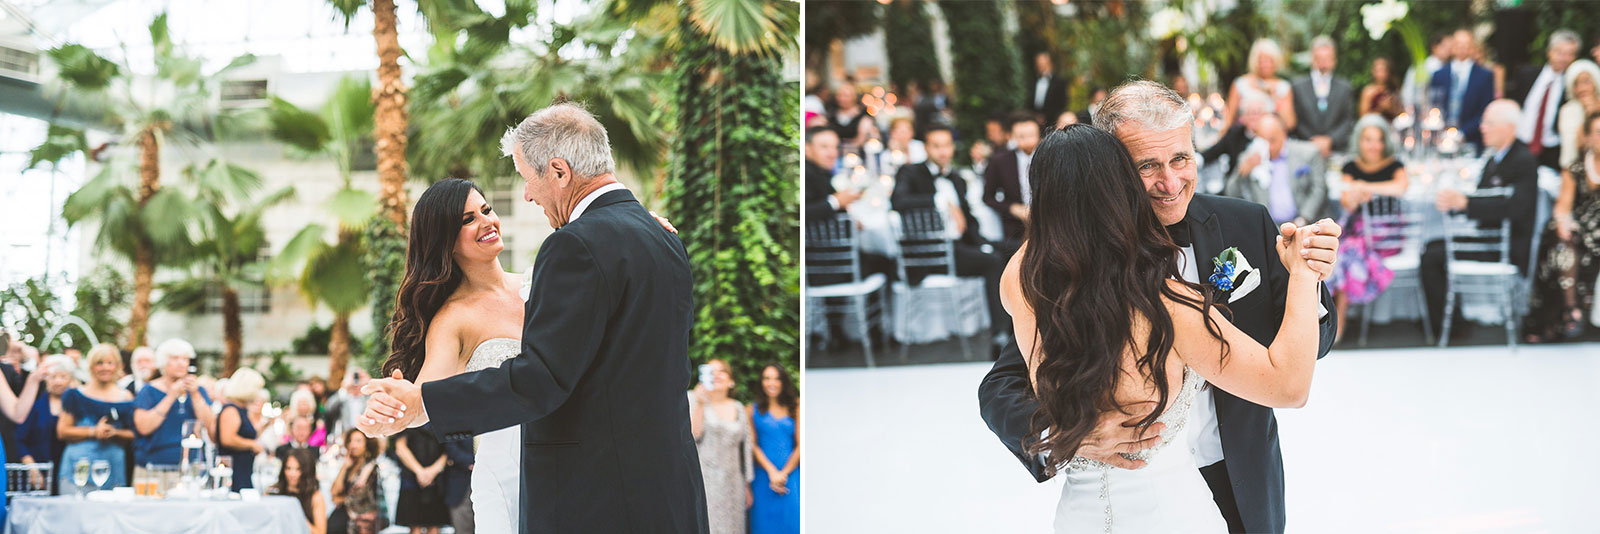 90-first-dance-with-dad